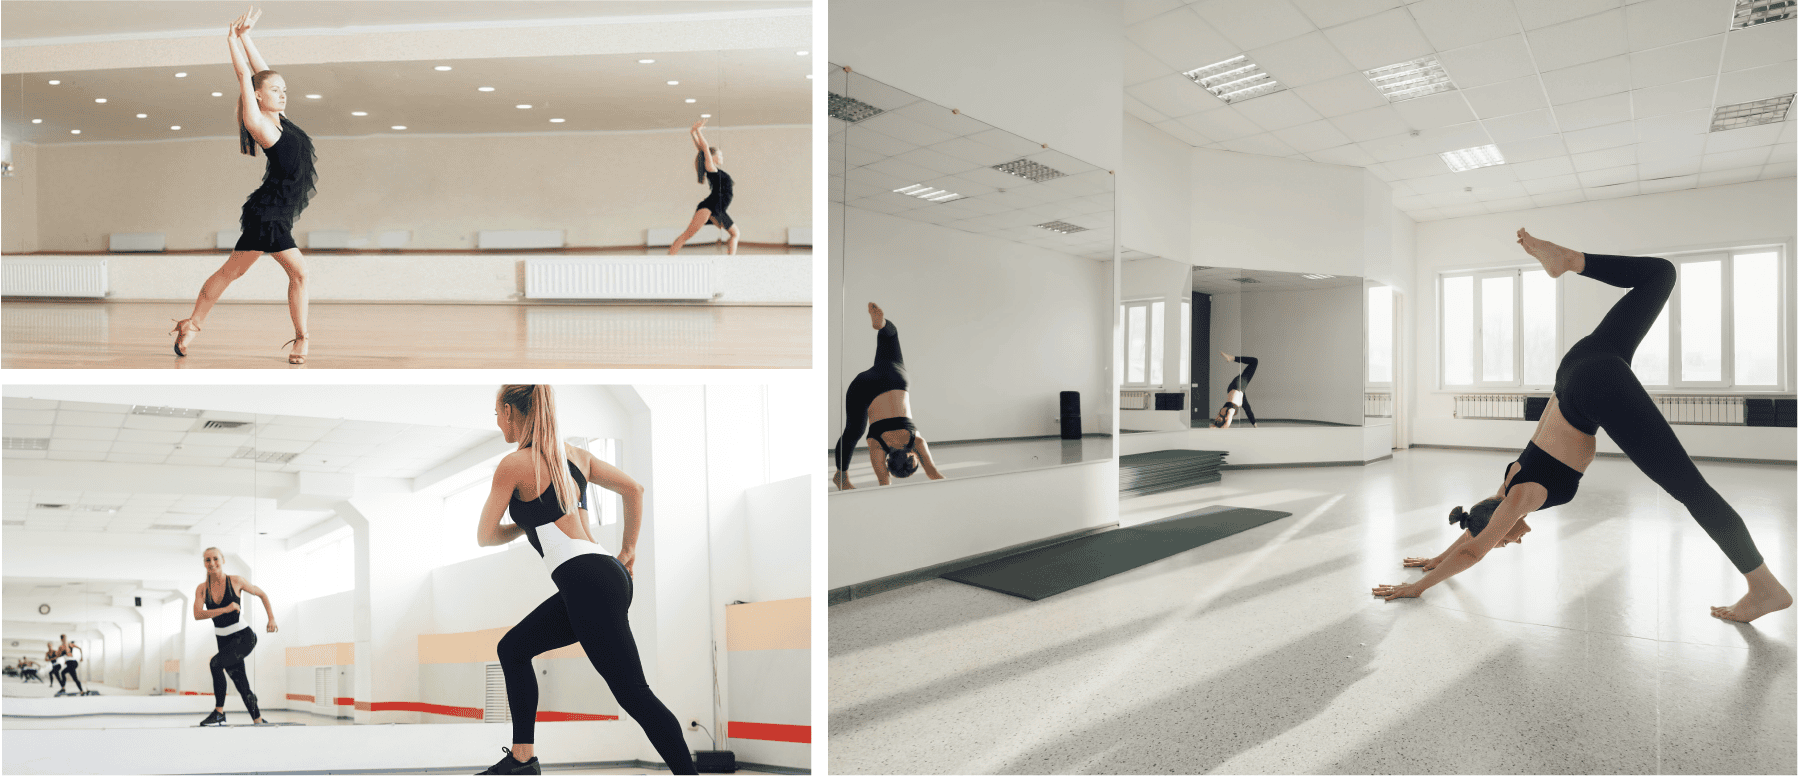 A series of three pictures showcasing people performing yoga in a gym, with a gym mirror reflecting their movements.